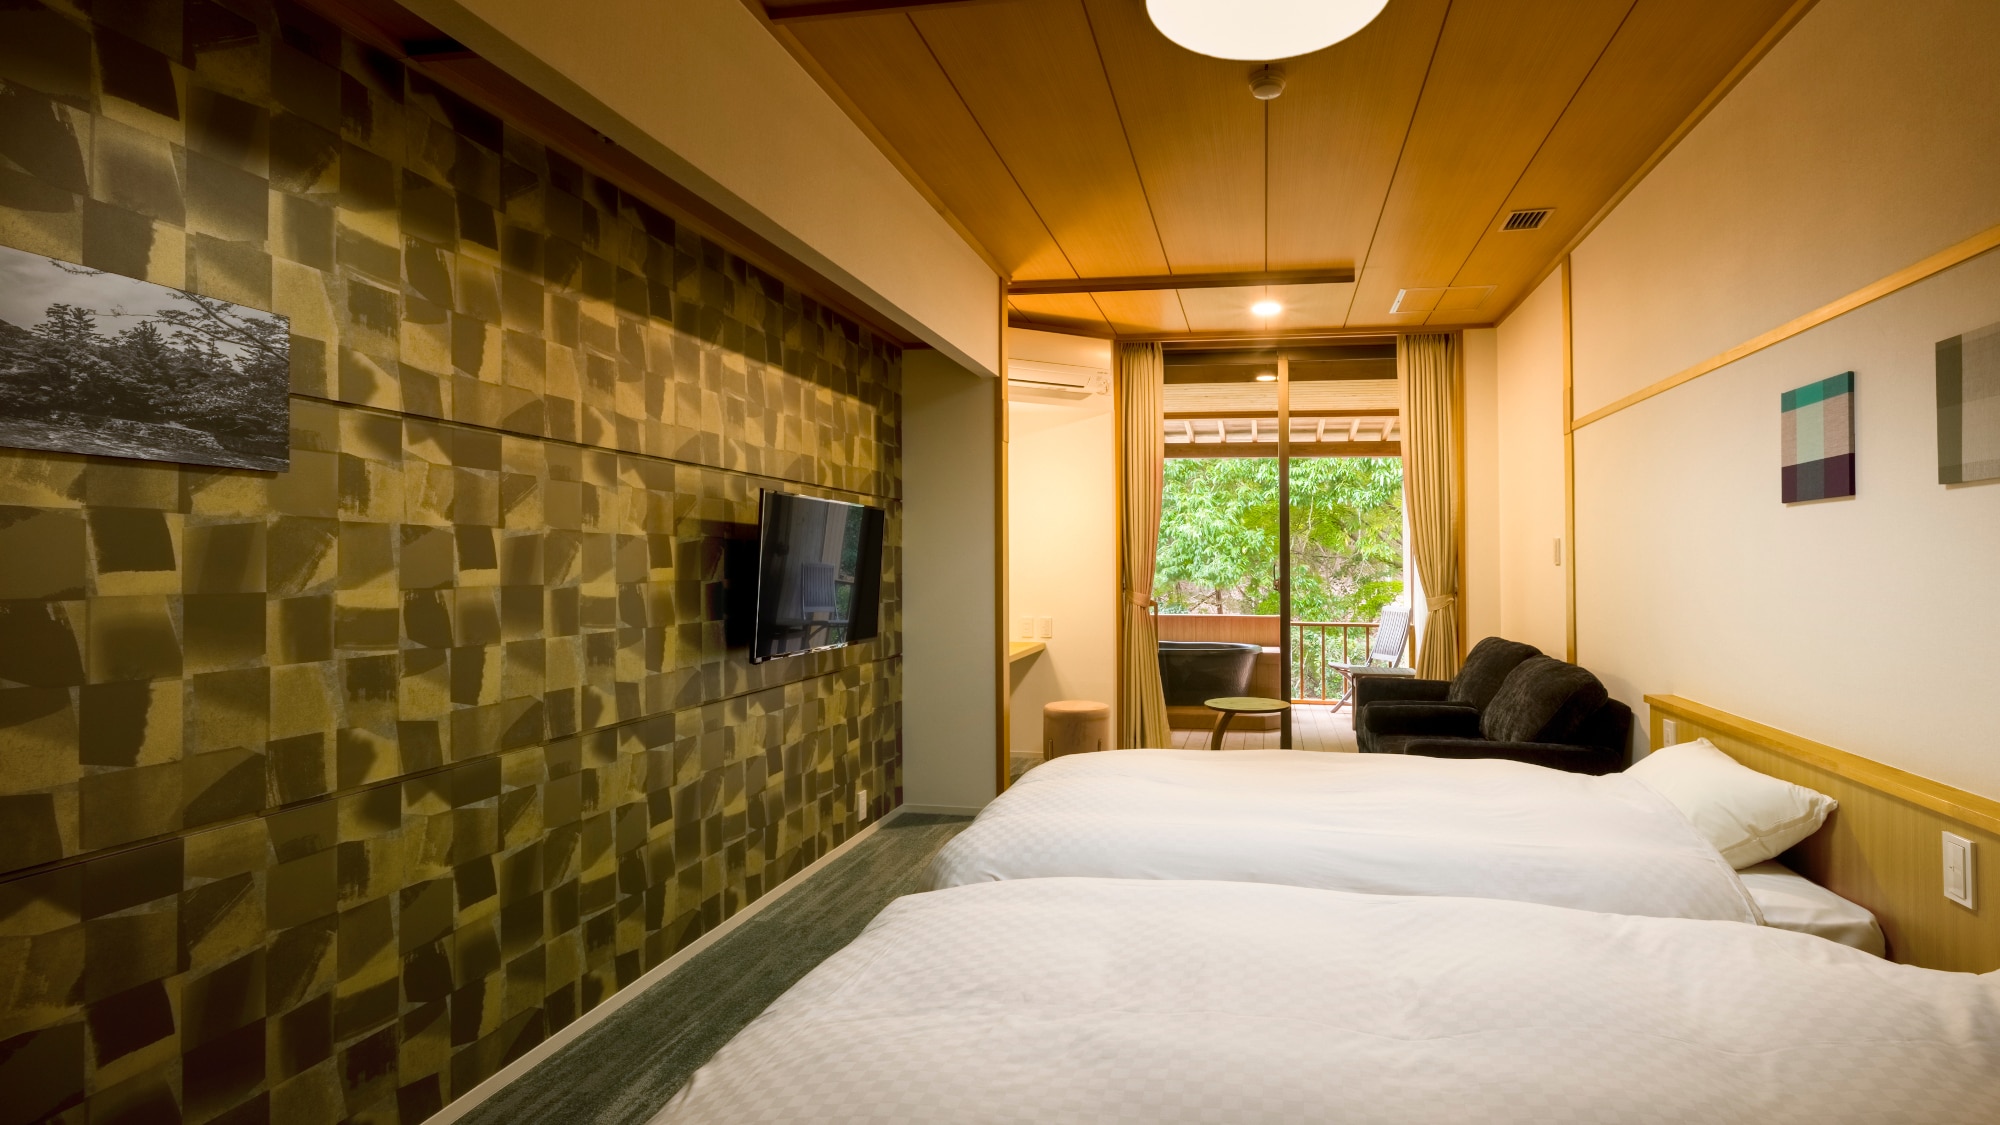 April 2021 ★Renewed guest room with open-air bath♪ Room limited to 2 people★